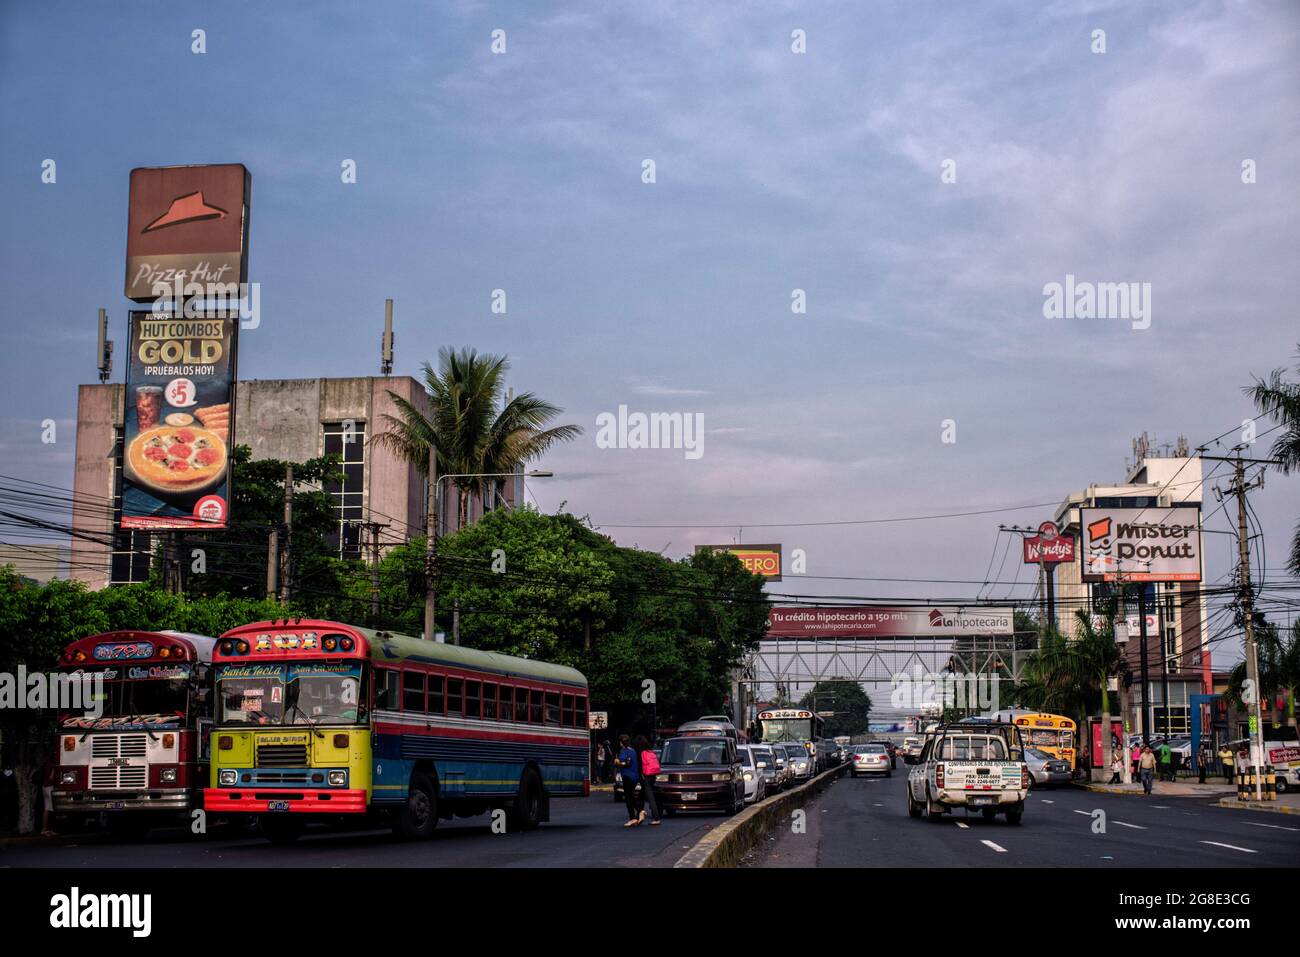 Central America - El Salvador, capital city San Salvador: A view of the Theodore Roosvelt boulevard one of the main transit arteries in the capital ci Stock Photo